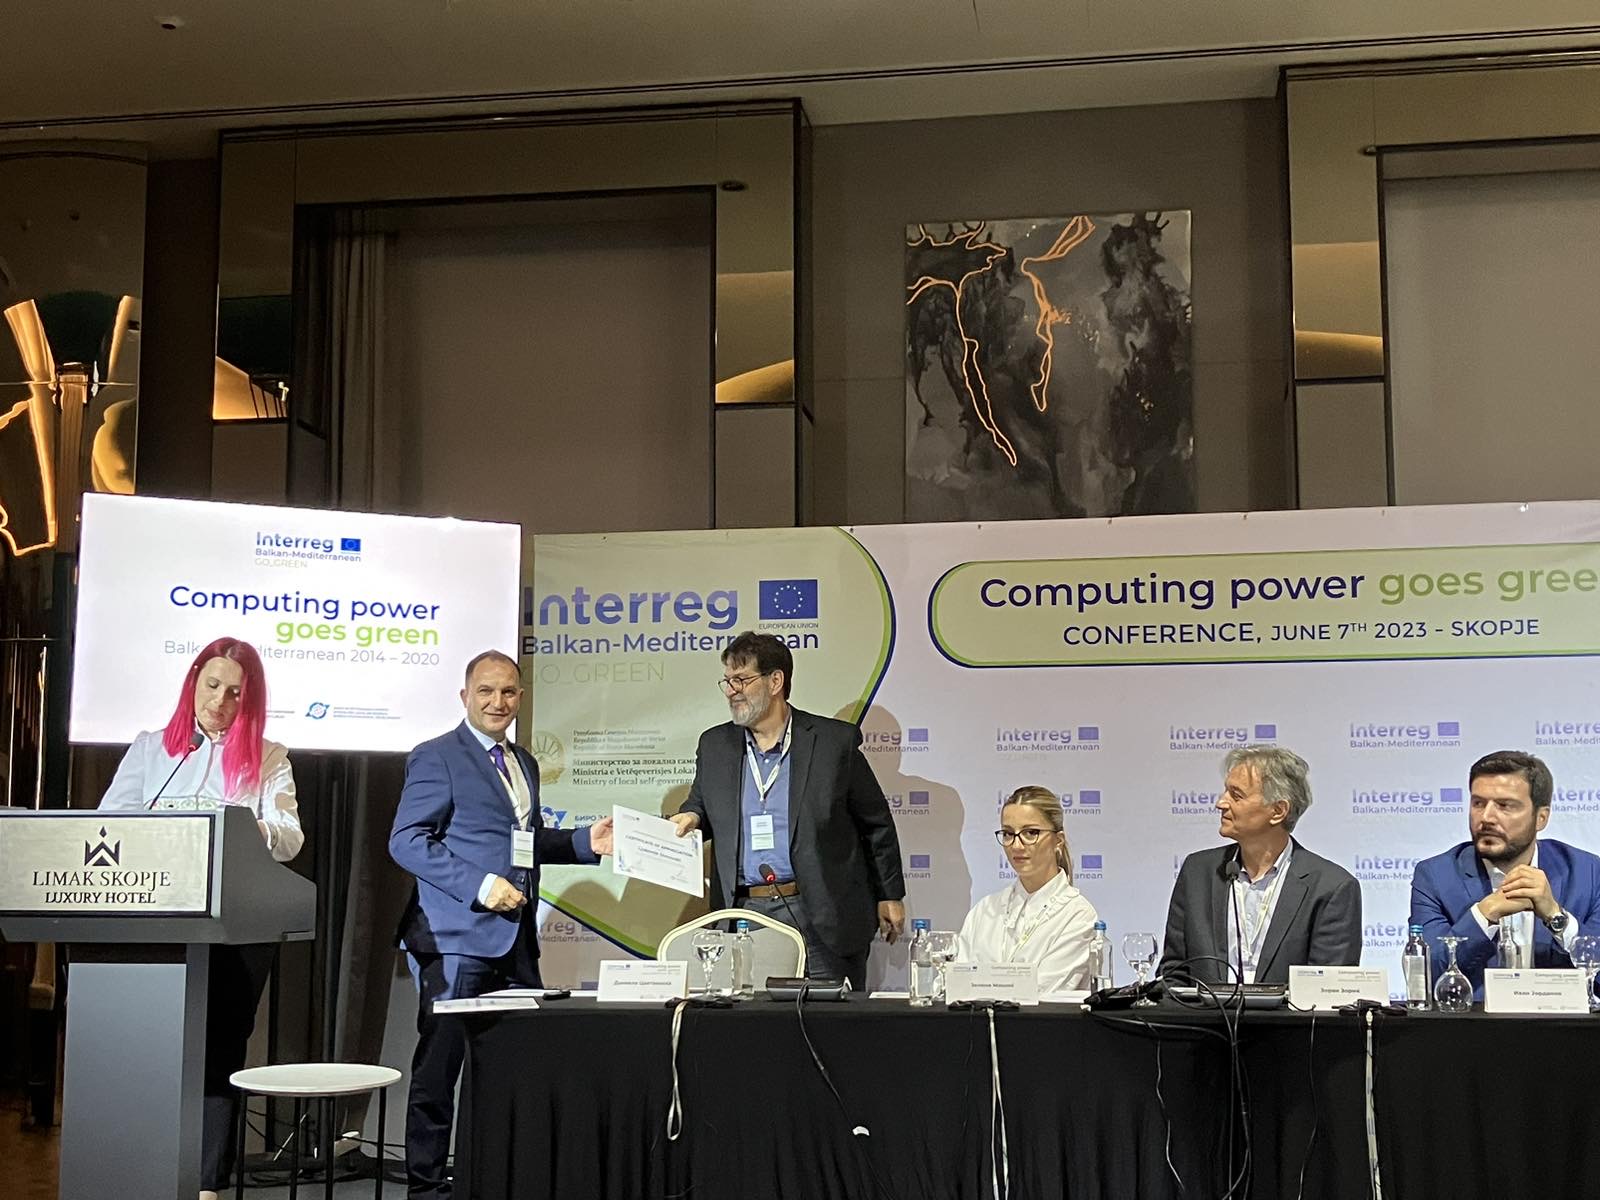 Conference: Computing power goes green